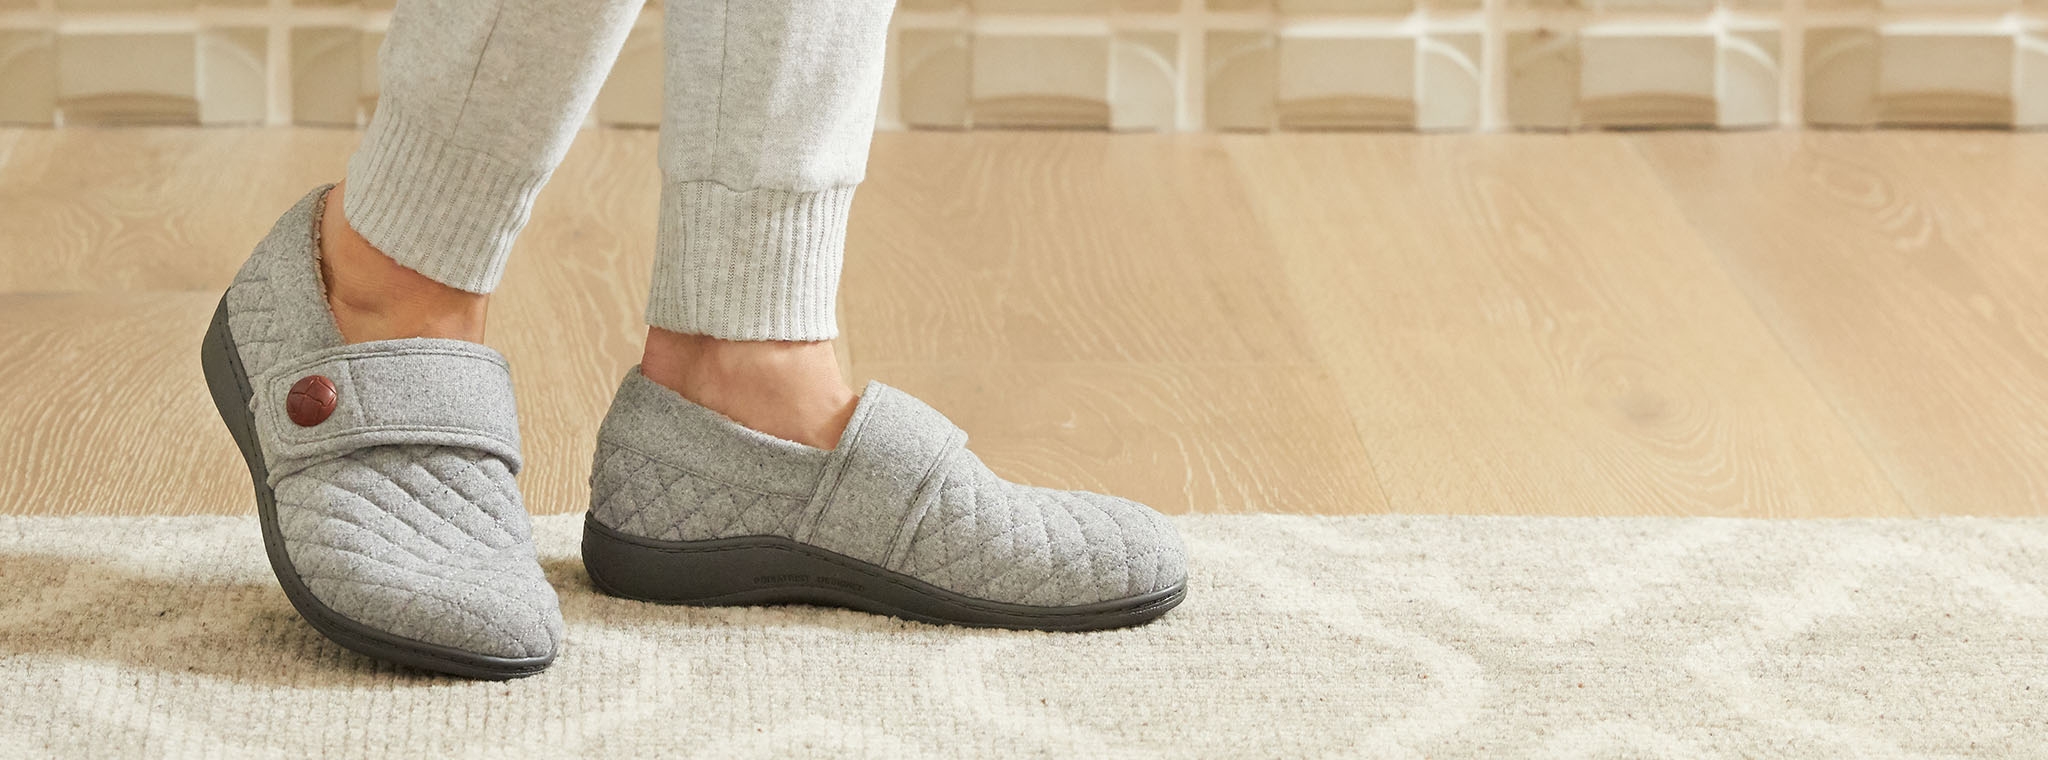 orthotic house slippers